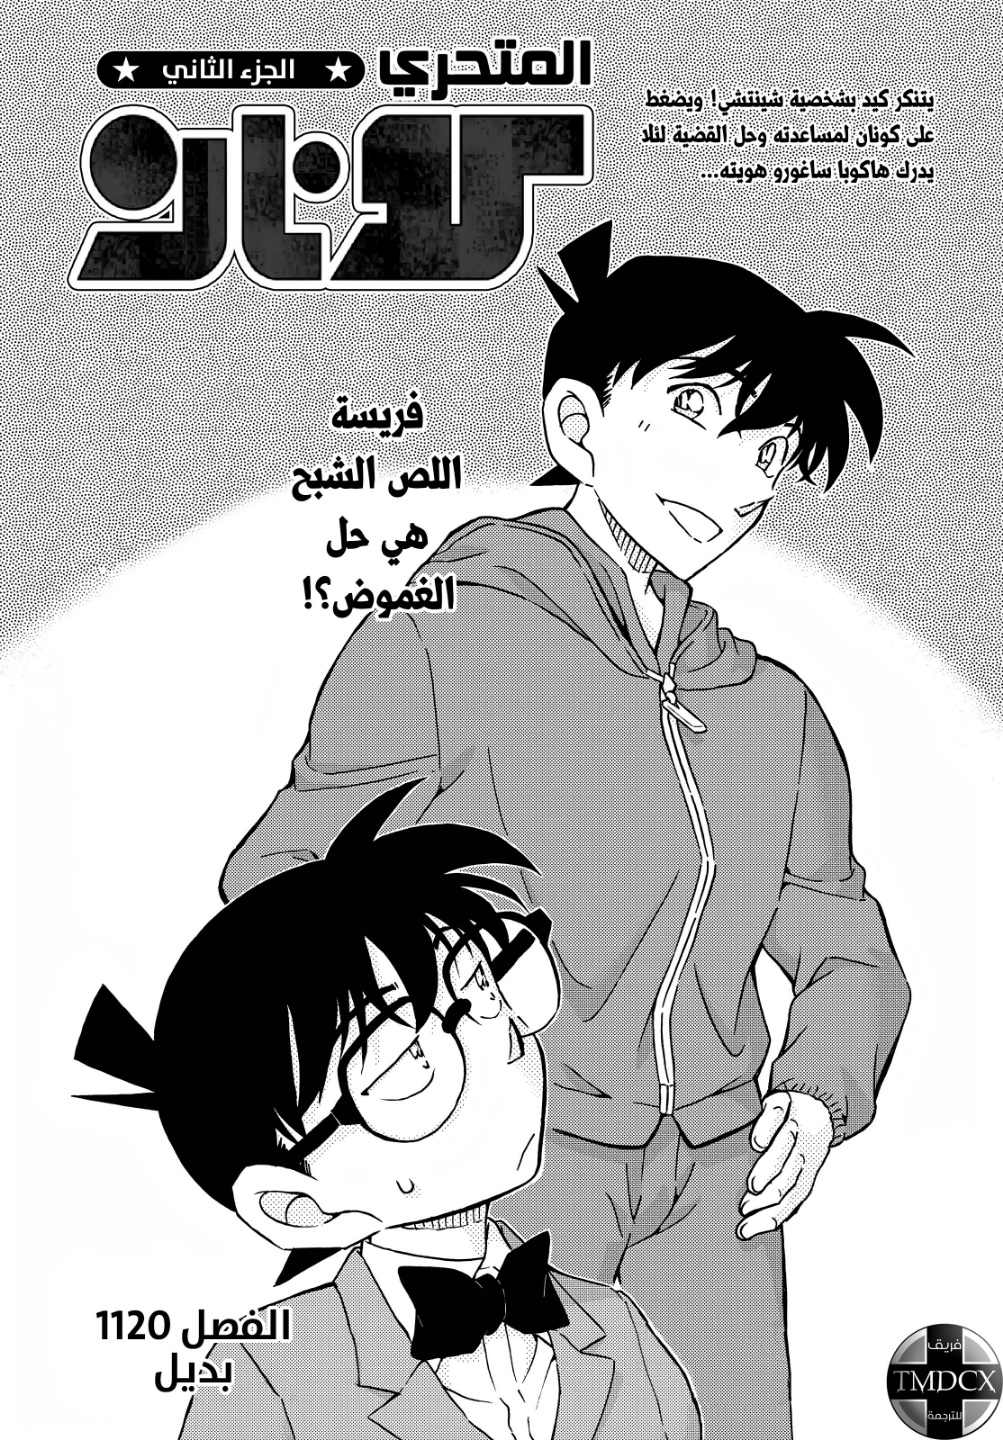 Detective Conan: Chapter 1120 - Page 1